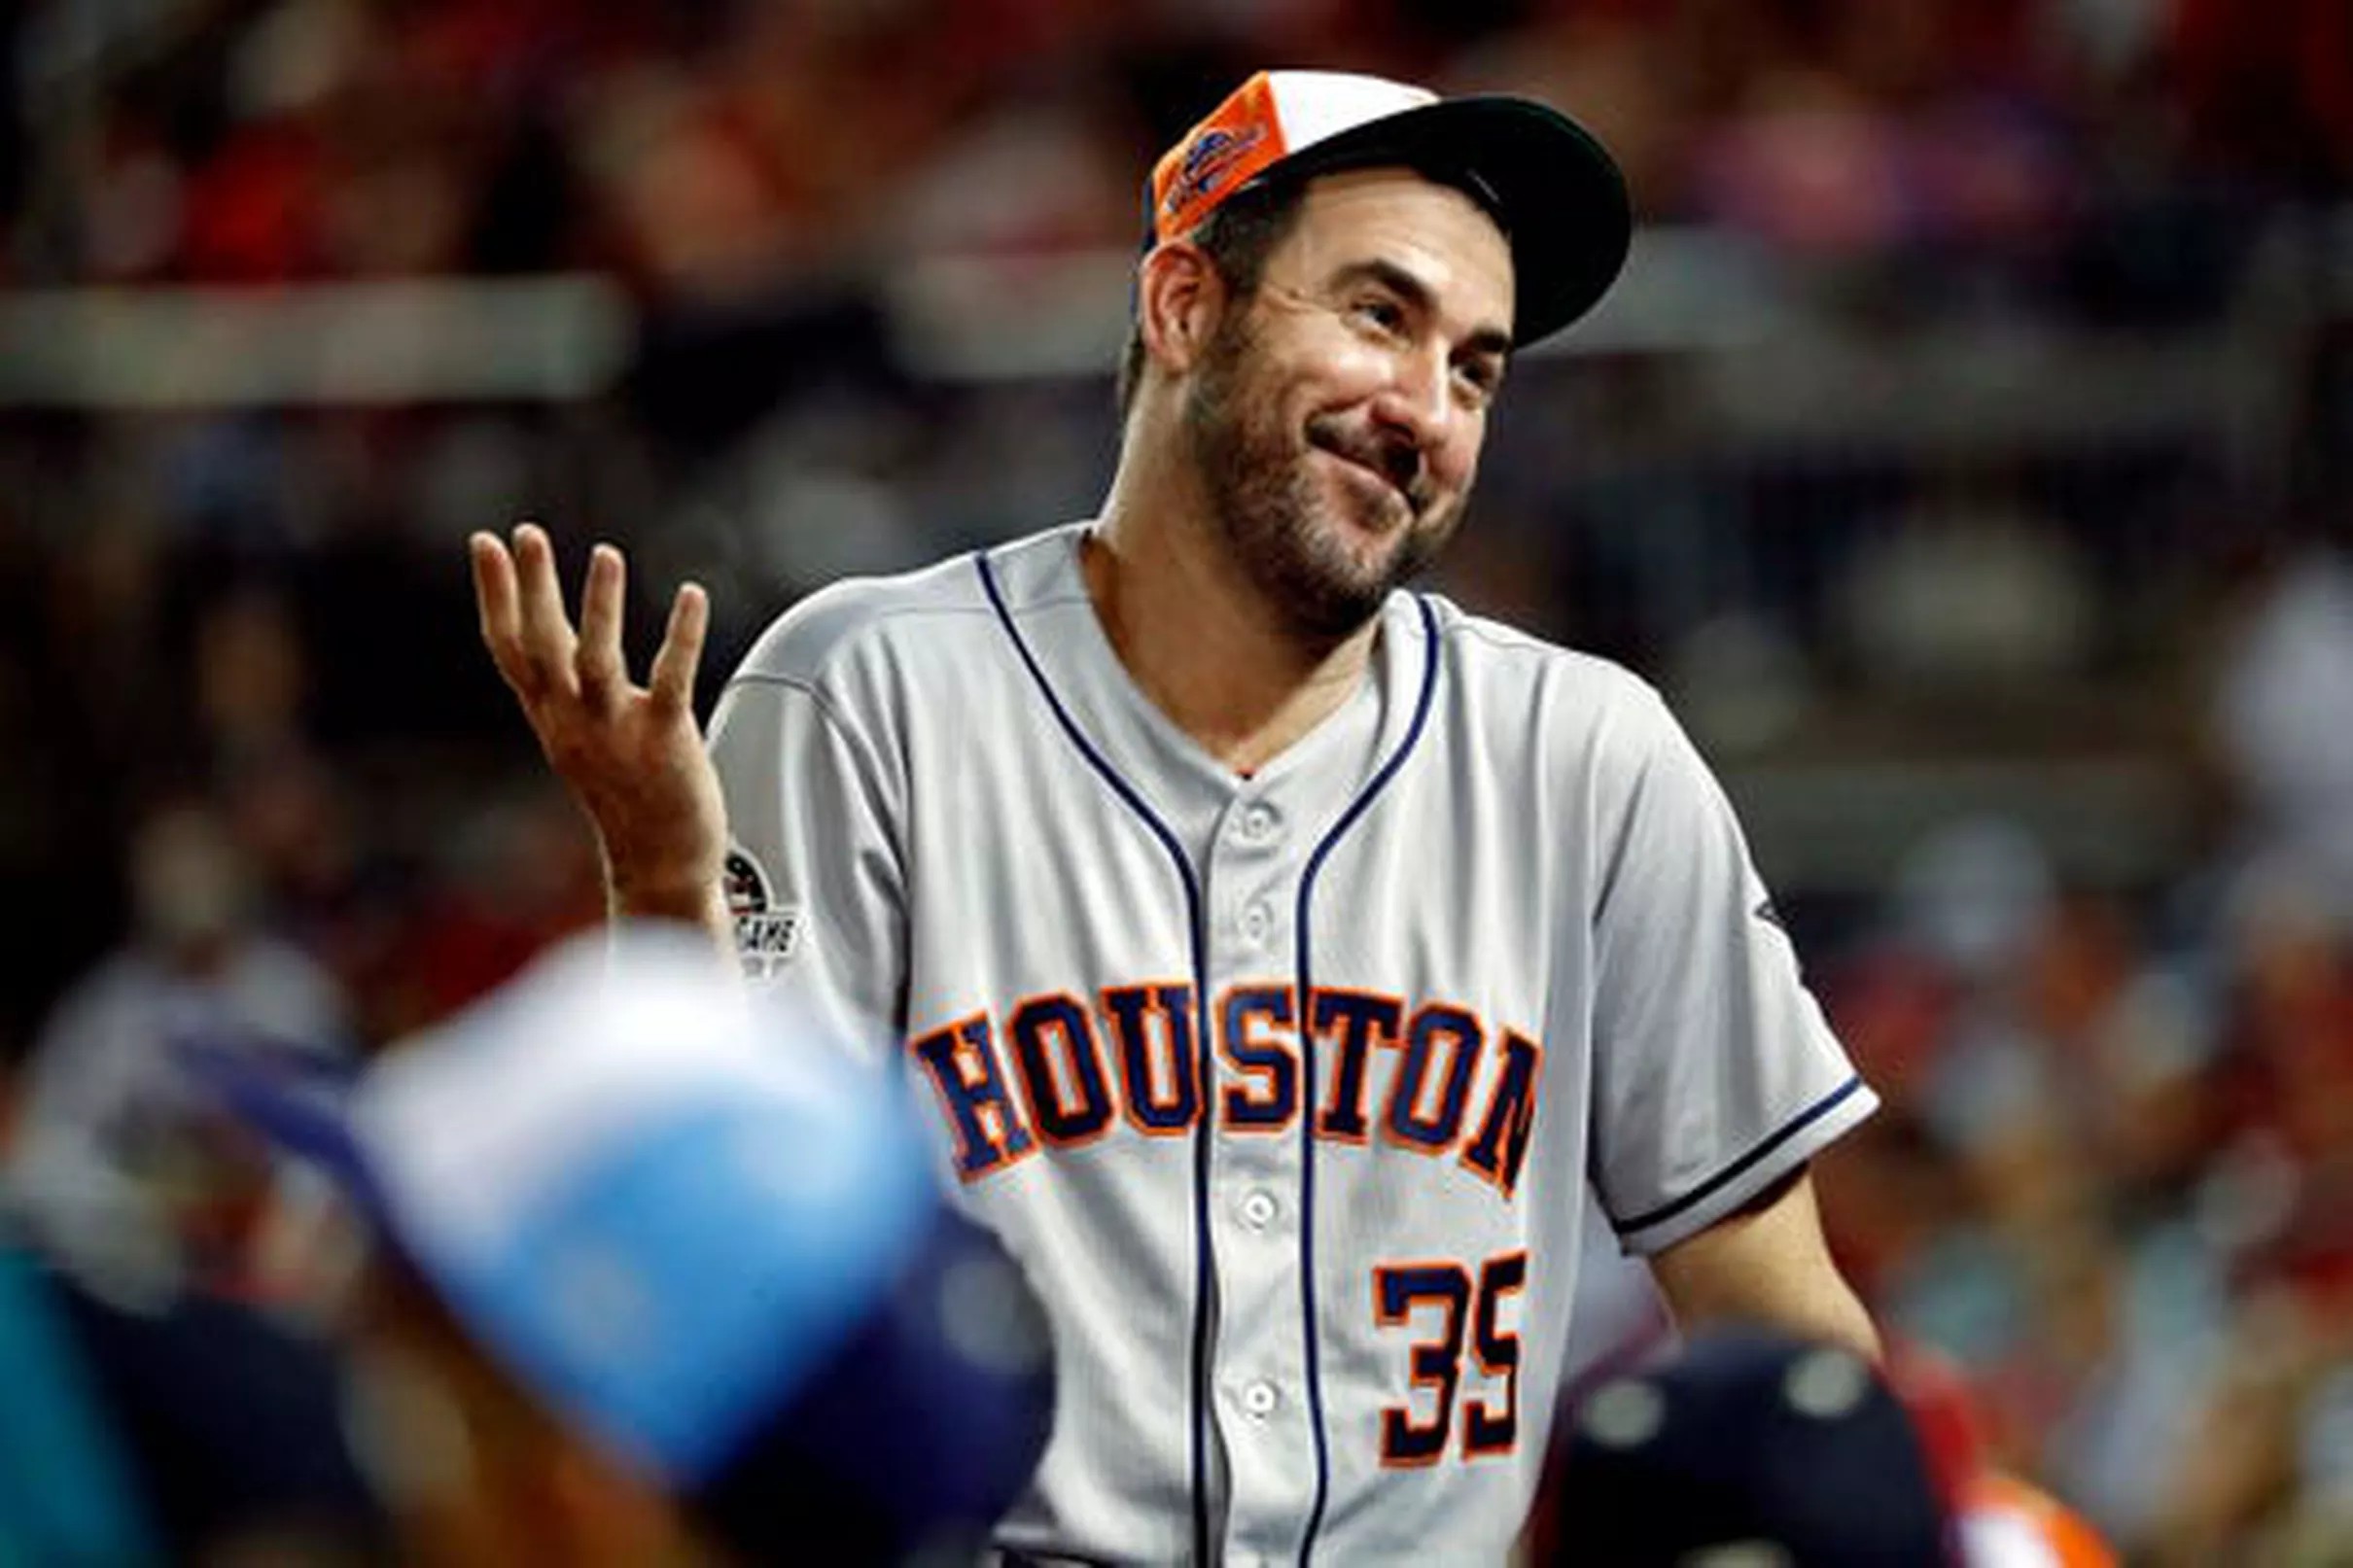 Justin Verlander passes Cy Young on the AllTime strikeout list.